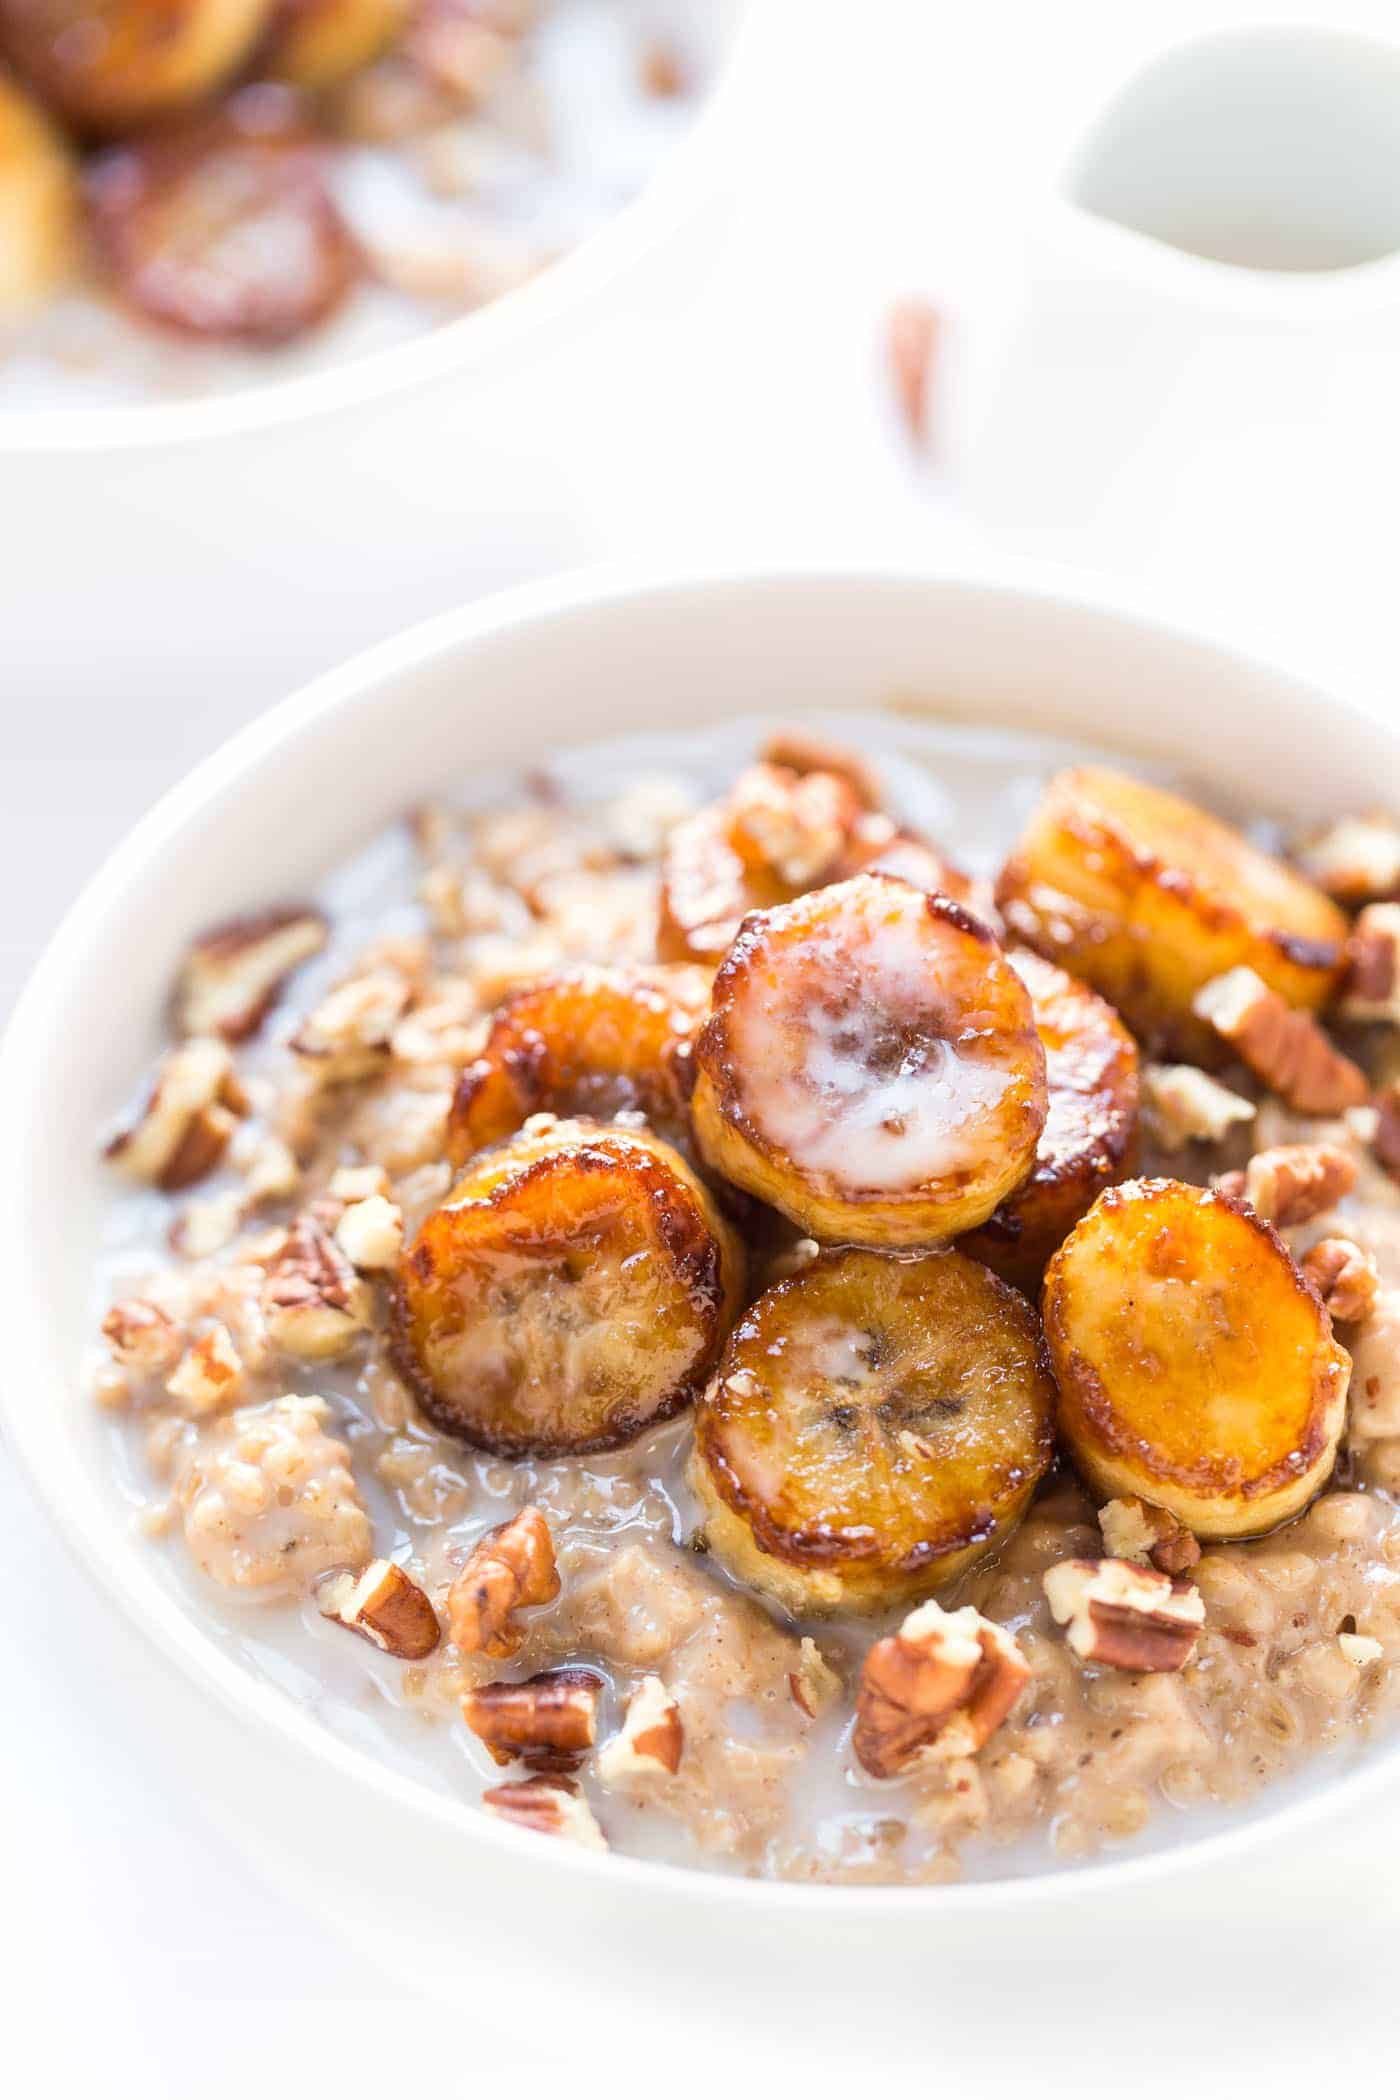 CREAMY STEEL CUT OATS topped with caramelized bananas, pecans and a drizzle of almond milk! [VEGAN]